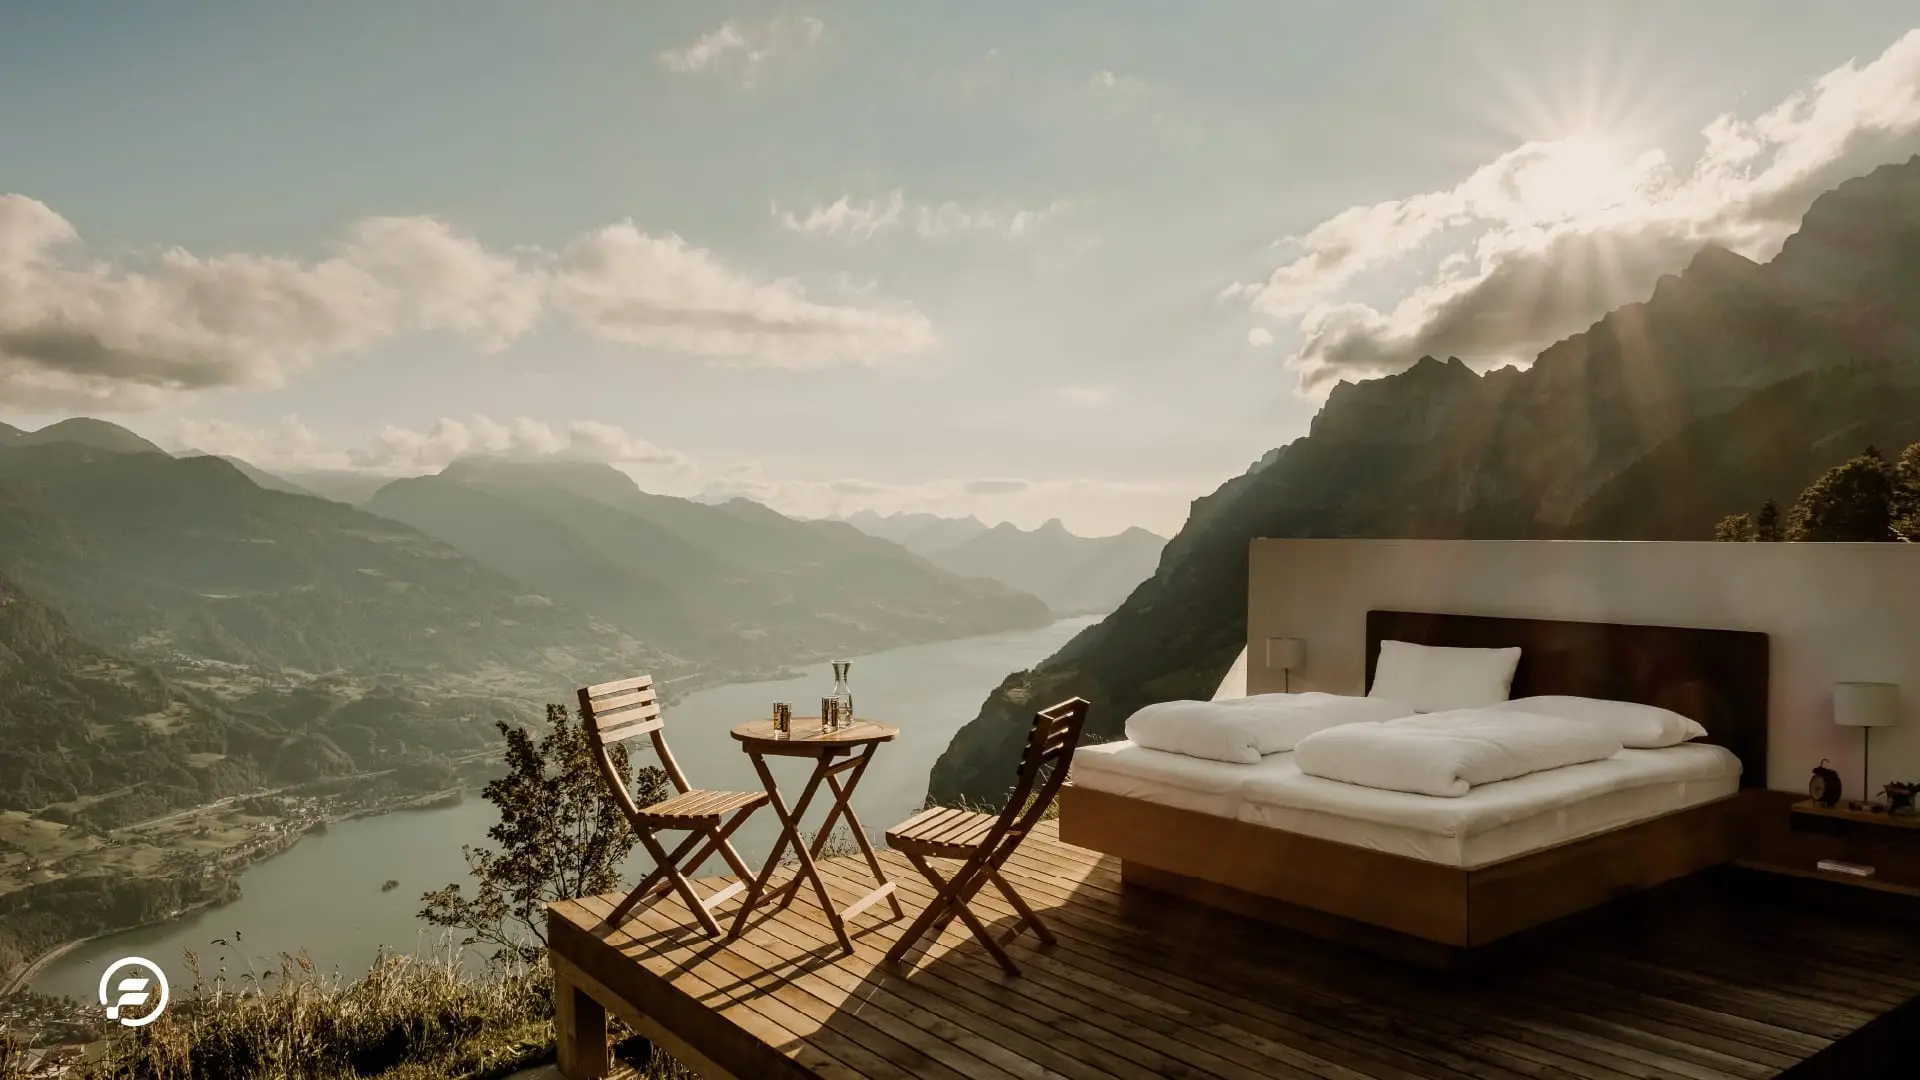 A mountain view with an bed and chairs for the luxurious traveller.